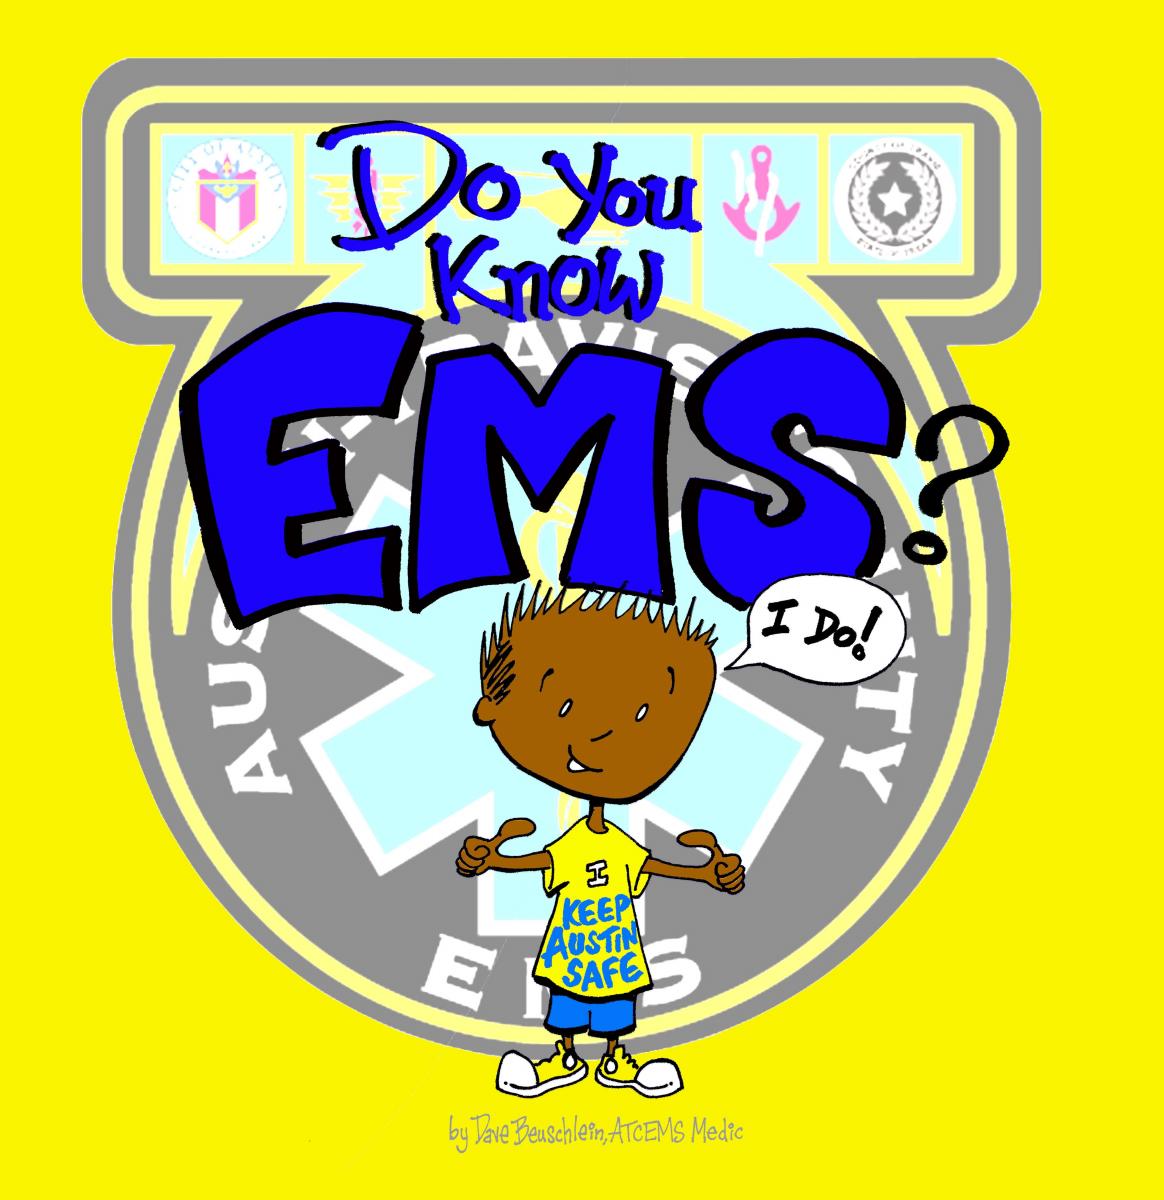 Cover of the EMS Children's Book "Do You Know EMS?"